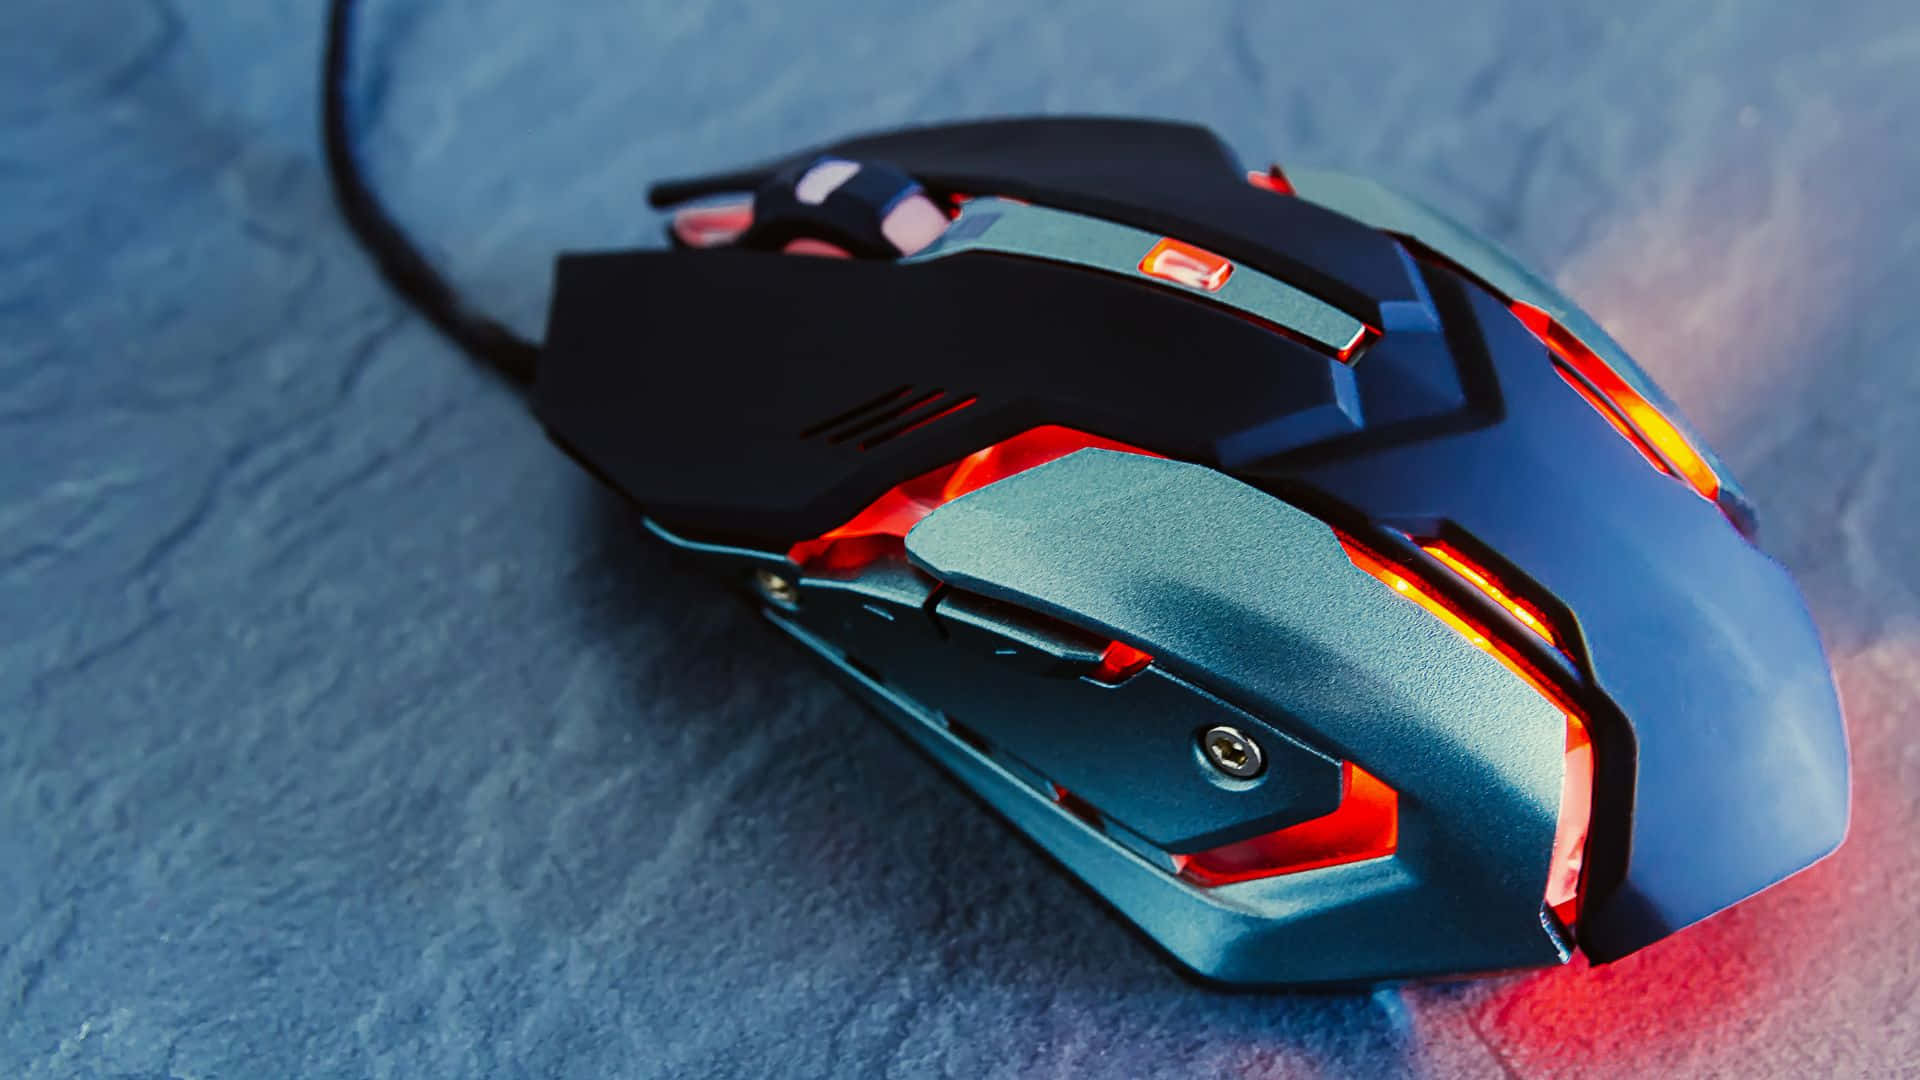 Enhance Your Gaming Ability With Quality Gaming Mice Wallpaper